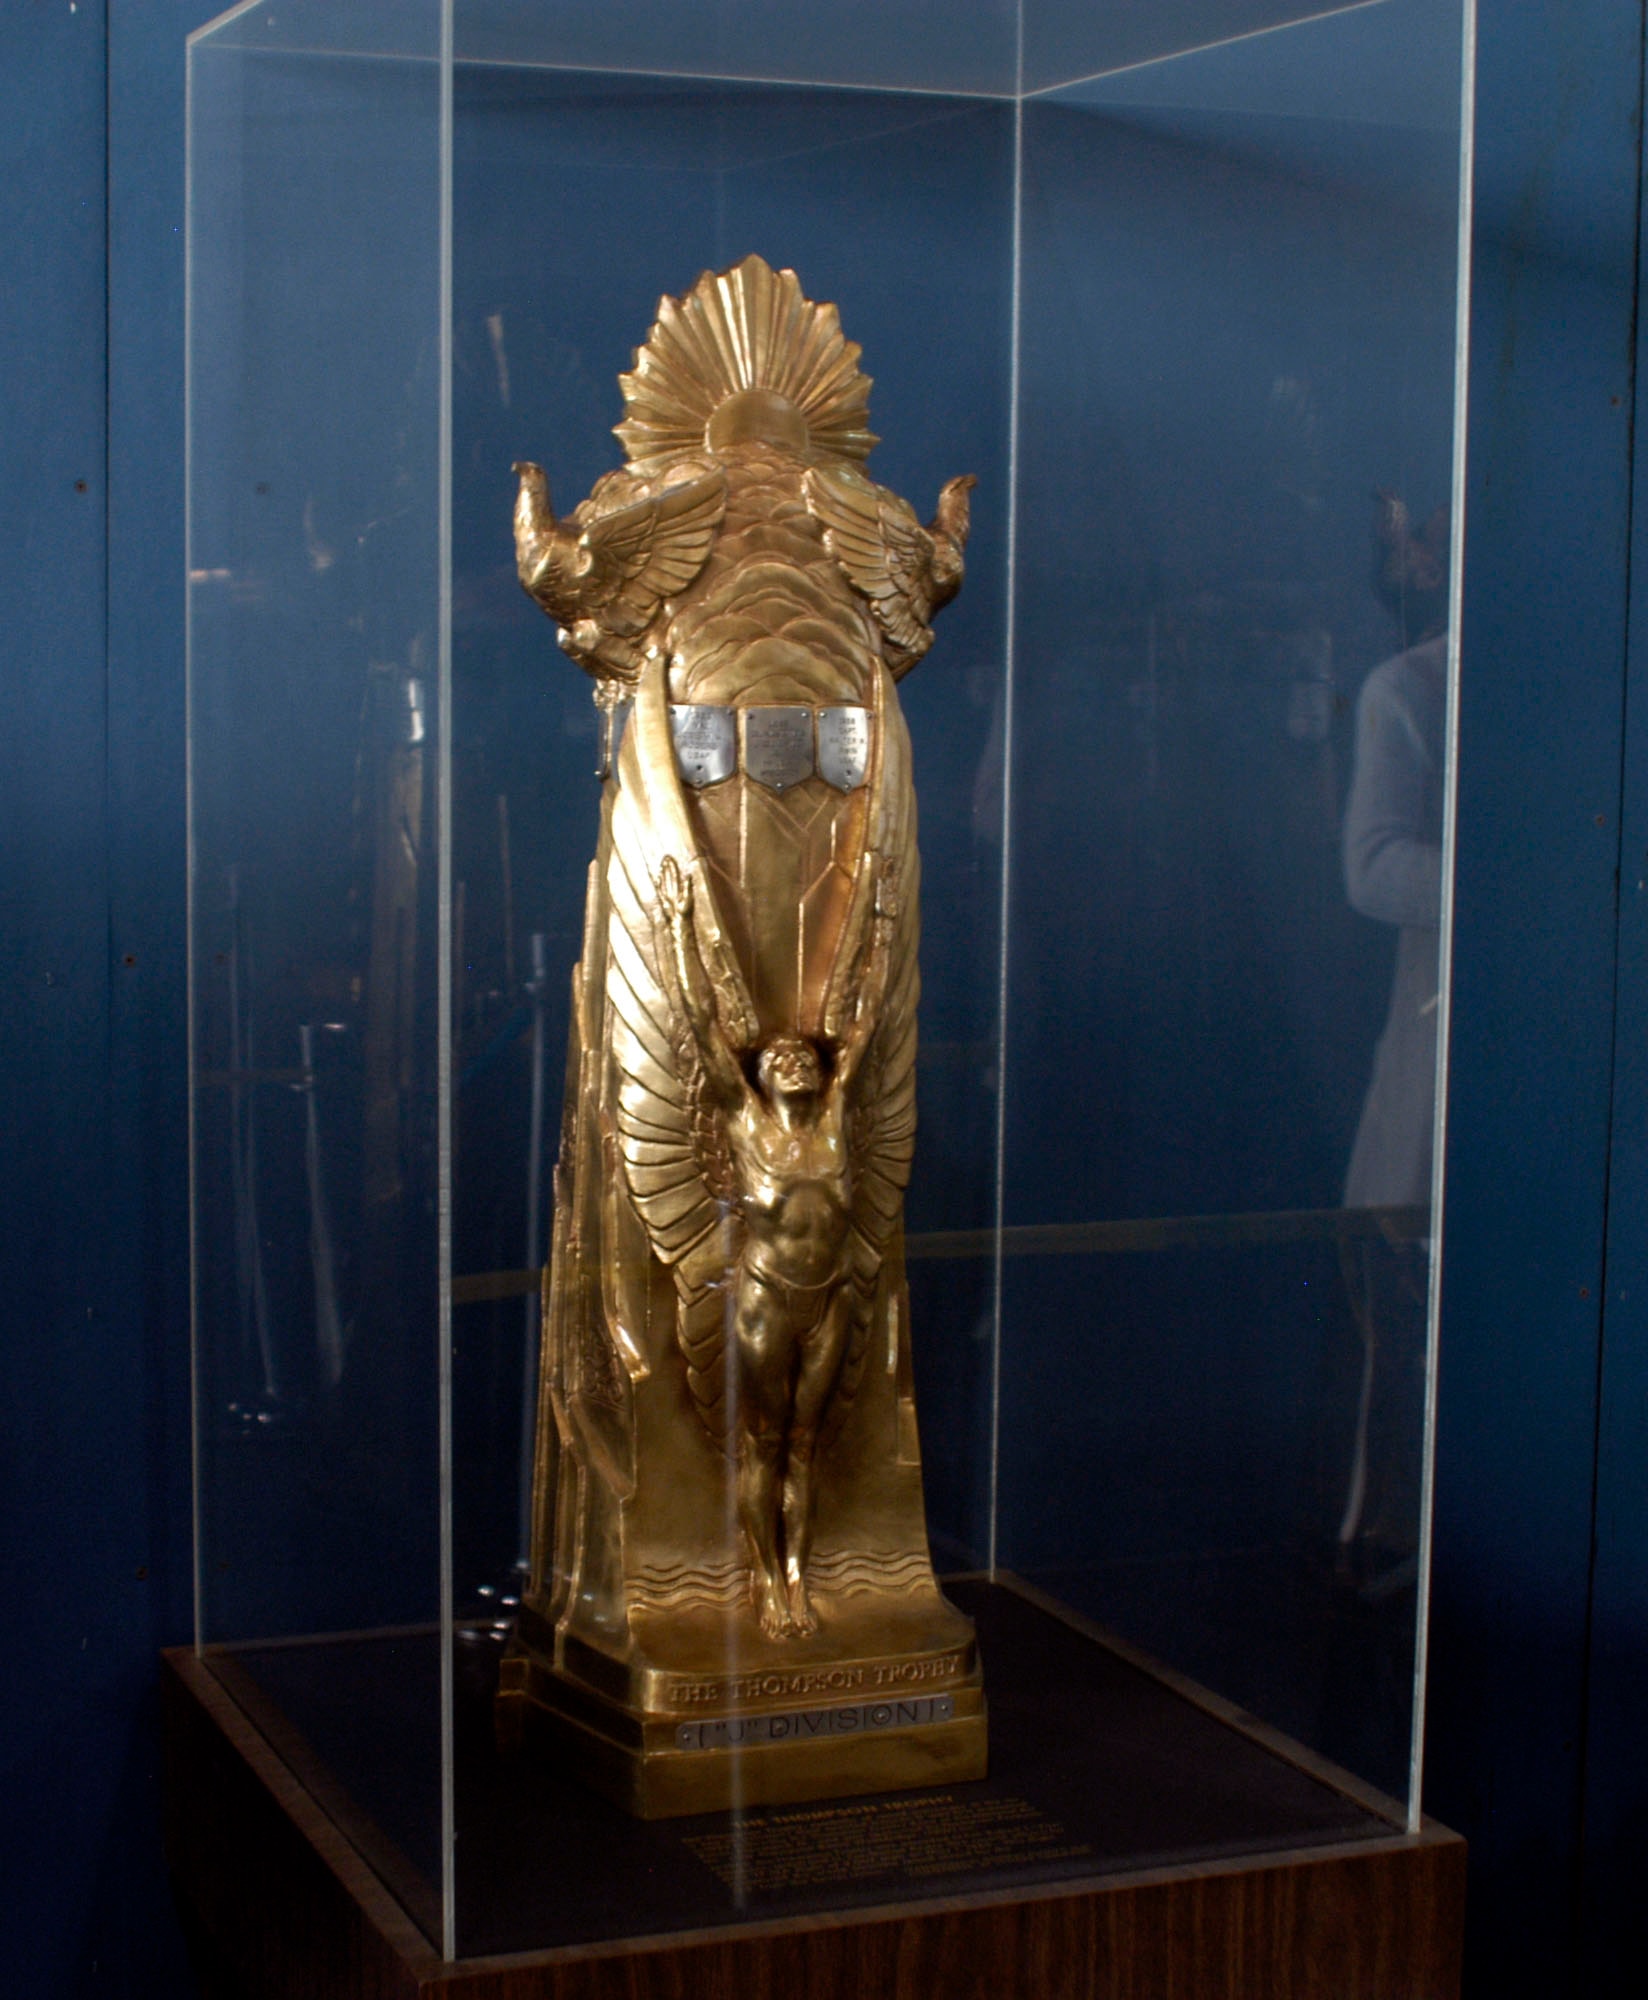 DAYTON, Ohio - The 1965 Thompson Trophy on display in the Research & Development Gallery at the National Museum of the U.S. Air Force. (U.S. Air Force photo)